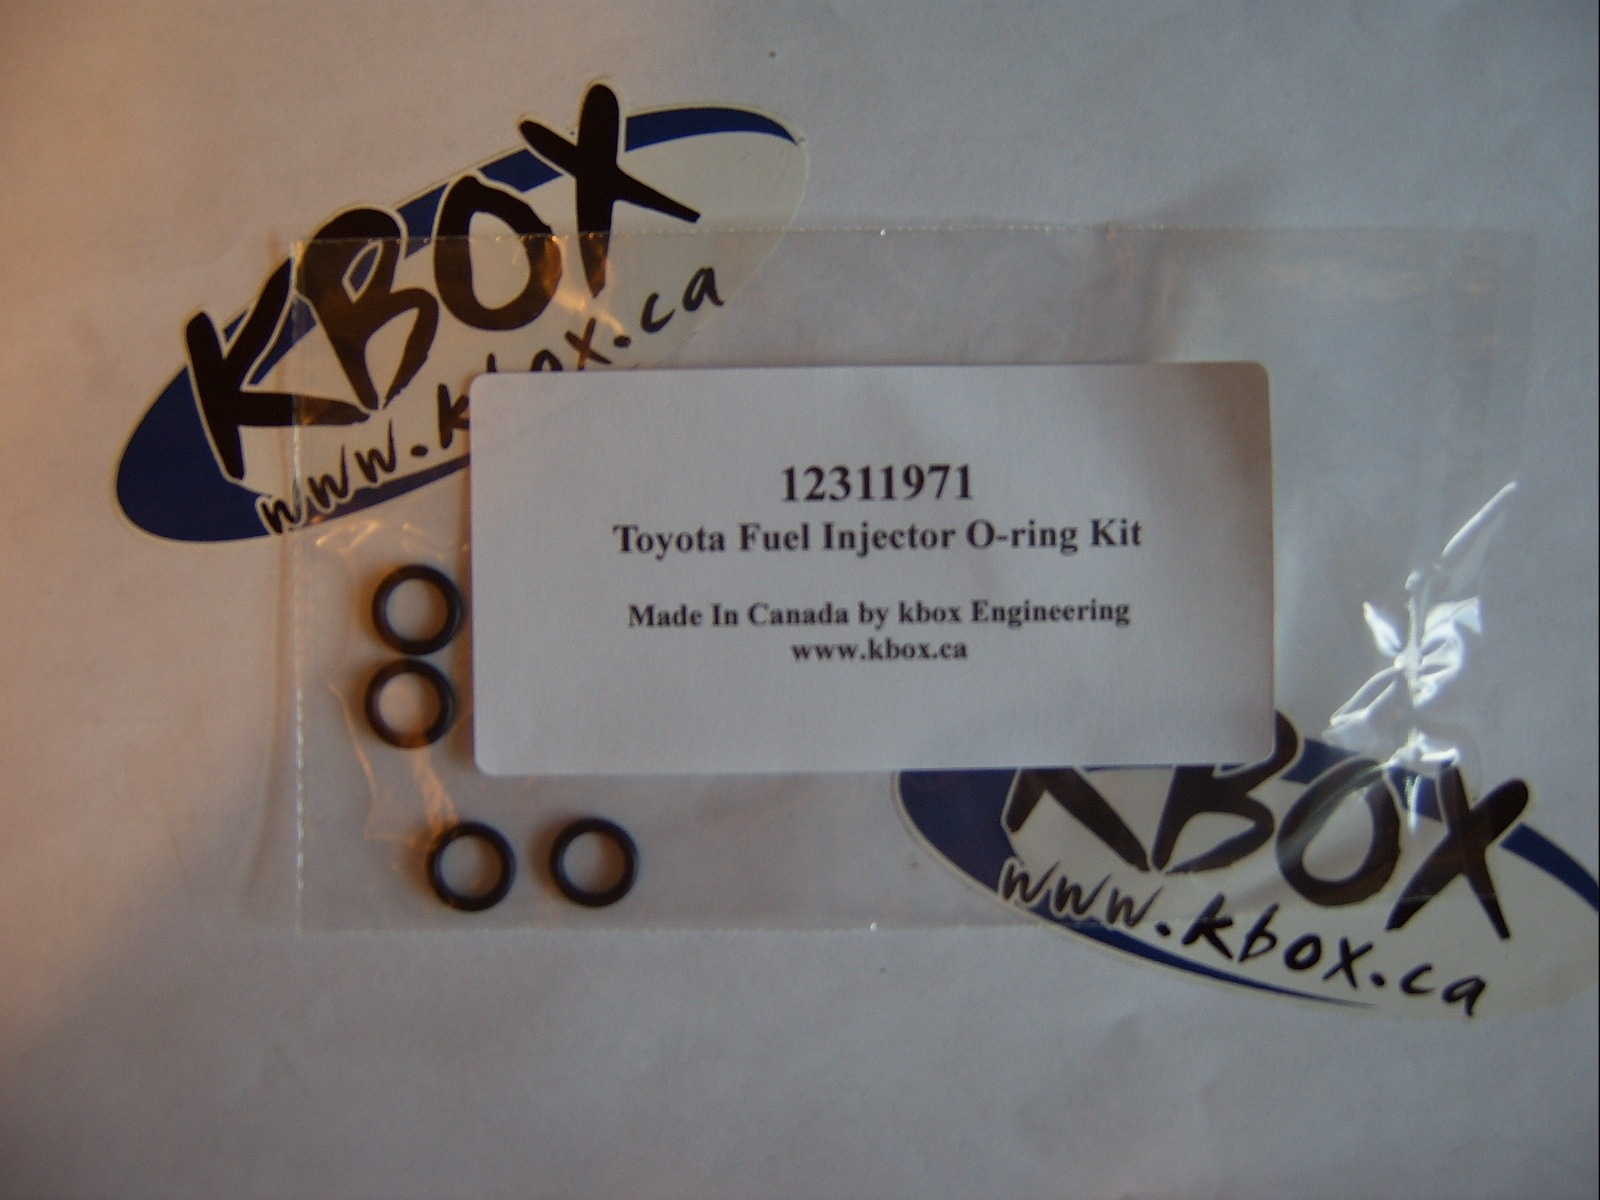 Fuel Injector O-ring Kit 4A-GE / 4A-GZE